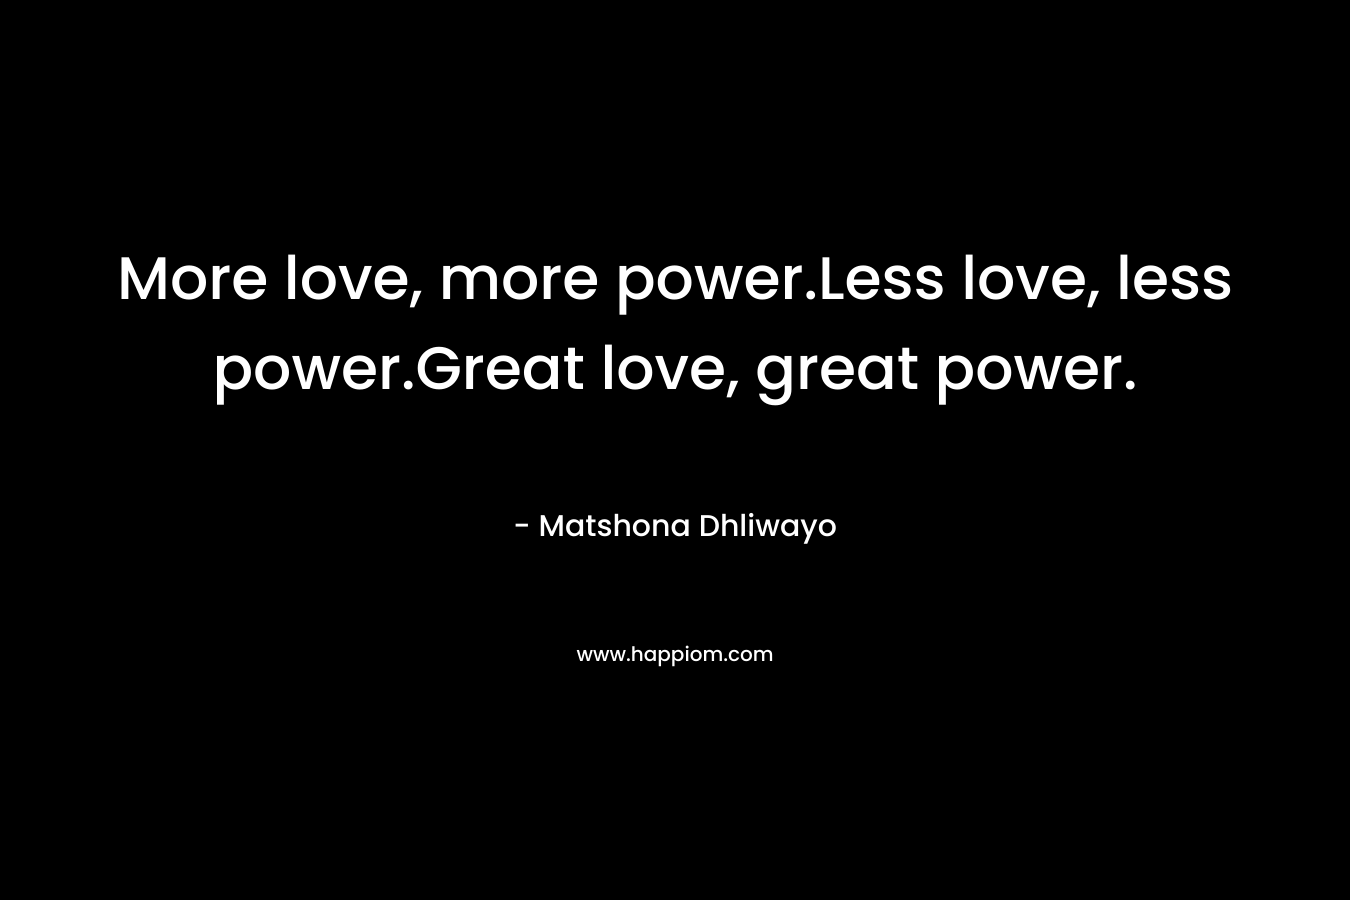 More love, more power.Less love, less power.Great love, great power.